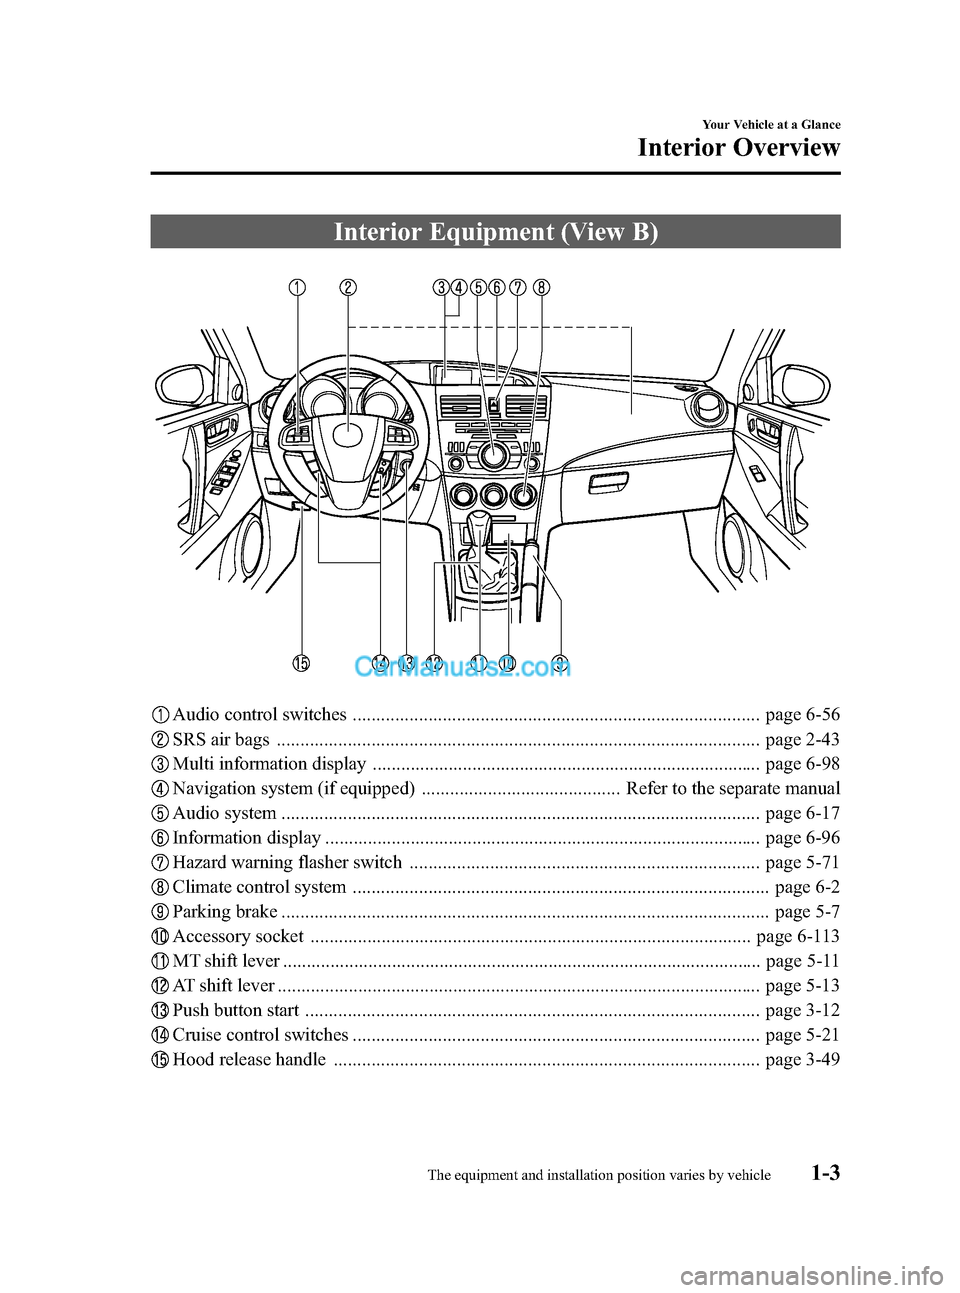 MAZDA MODEL MAZDASPEED 3 2012  Owners Manual (in English) Black plate (9,1)
Interior Equipment (View B)
Audio control switches ...................................................................................... page 6-56
SRS air bags .....................